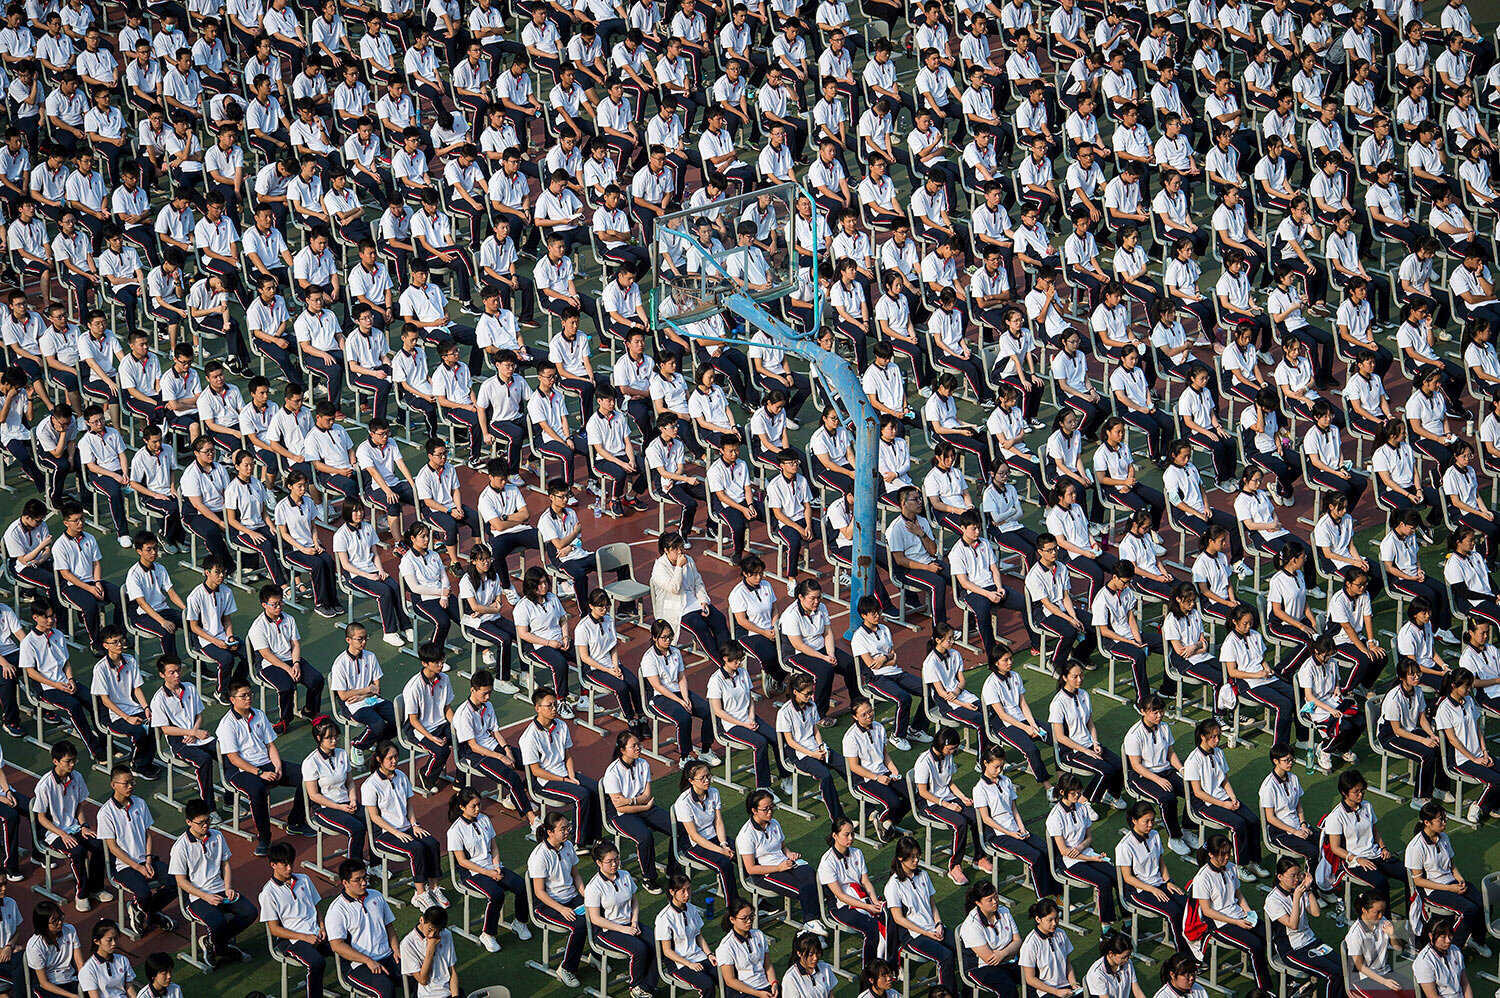  Students attend a ceremony to kick off the new semester in Wuhan High School in Wuhan in central China's Hubei province Tuesday, Sept. 1, 2020. (Chinatopix Via AP) 